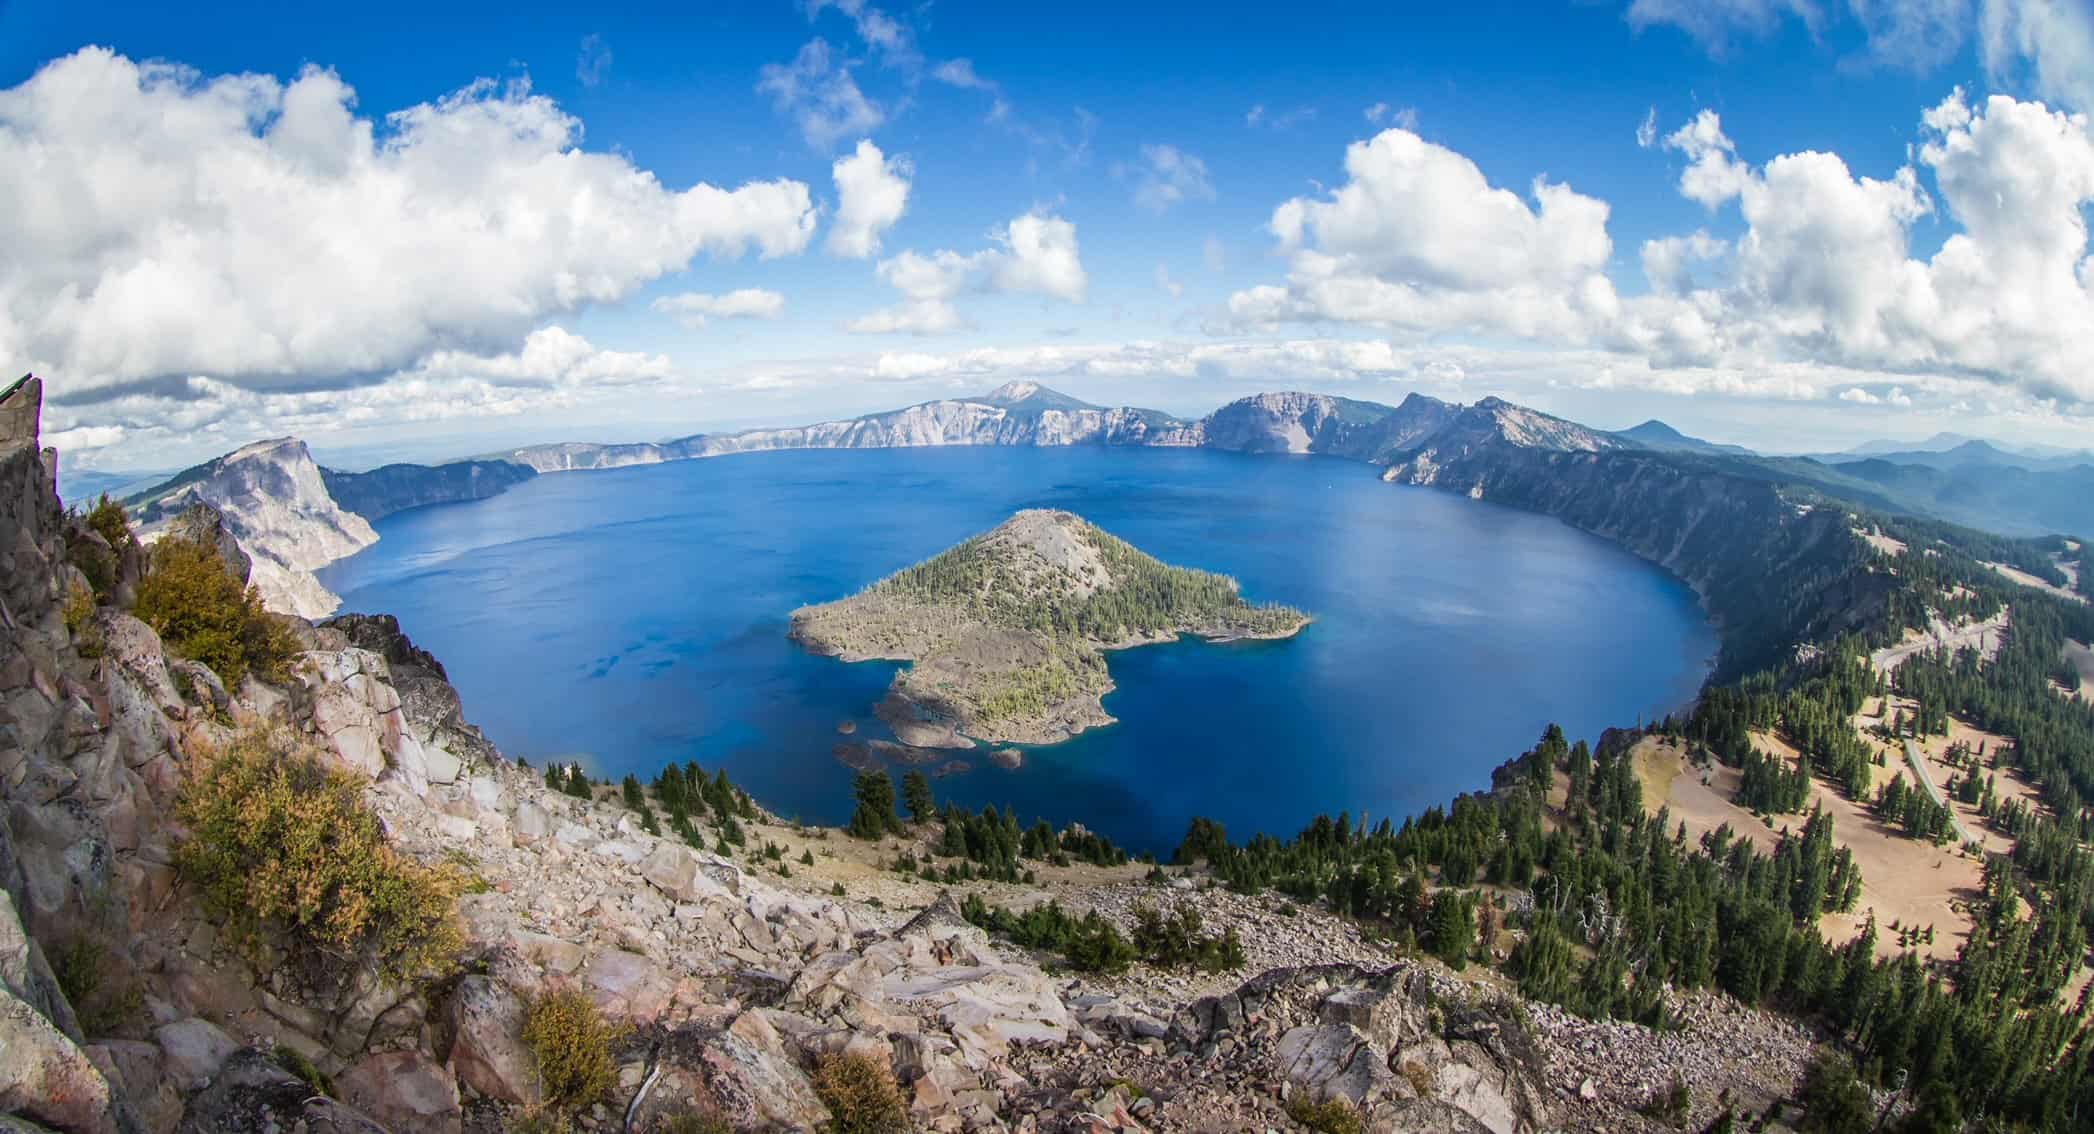 wide angle view of Crater Lake form the top of Watchman's Peak, beautiful landscape in Oregon